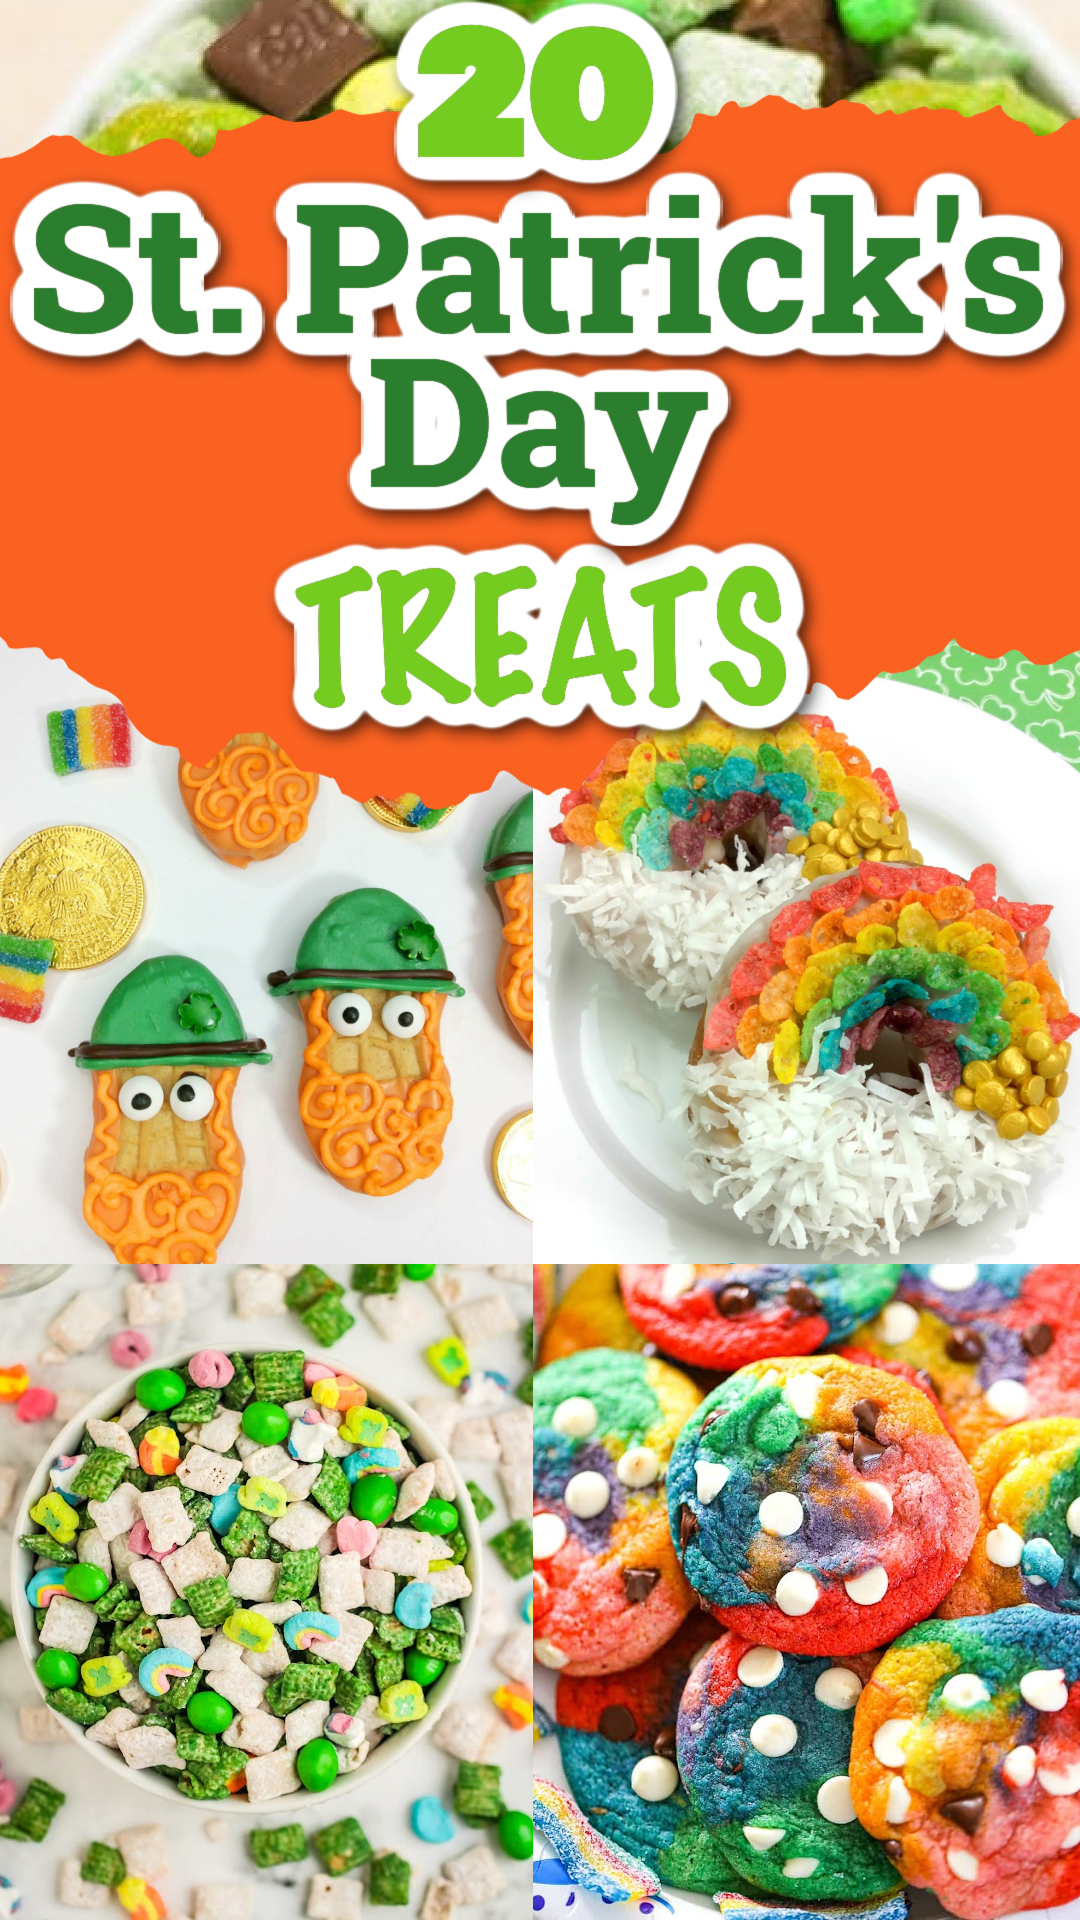 A pin image collage of St. Patrick's Day treats